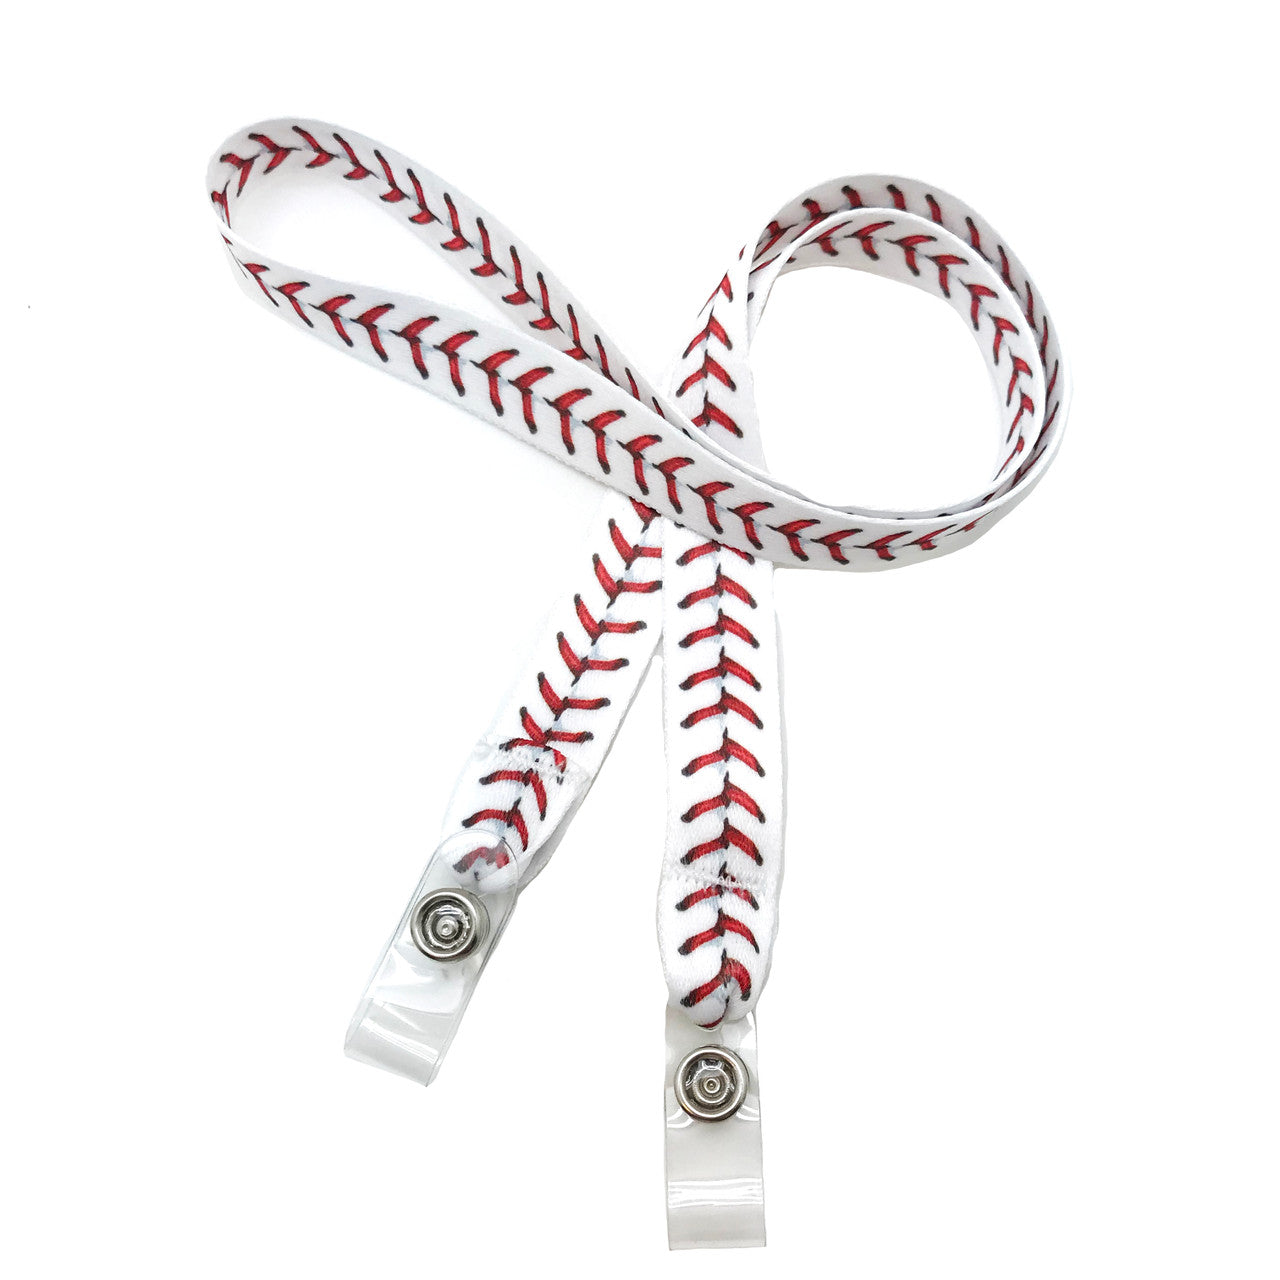 24" mask holder with soft plastic snap closures printed with a baseball stitch design printed on both sides on  5/8" Ultra Lanyard material are perfect for children and adults for keeping track of face masks at school, sports practice, lunch and break time.